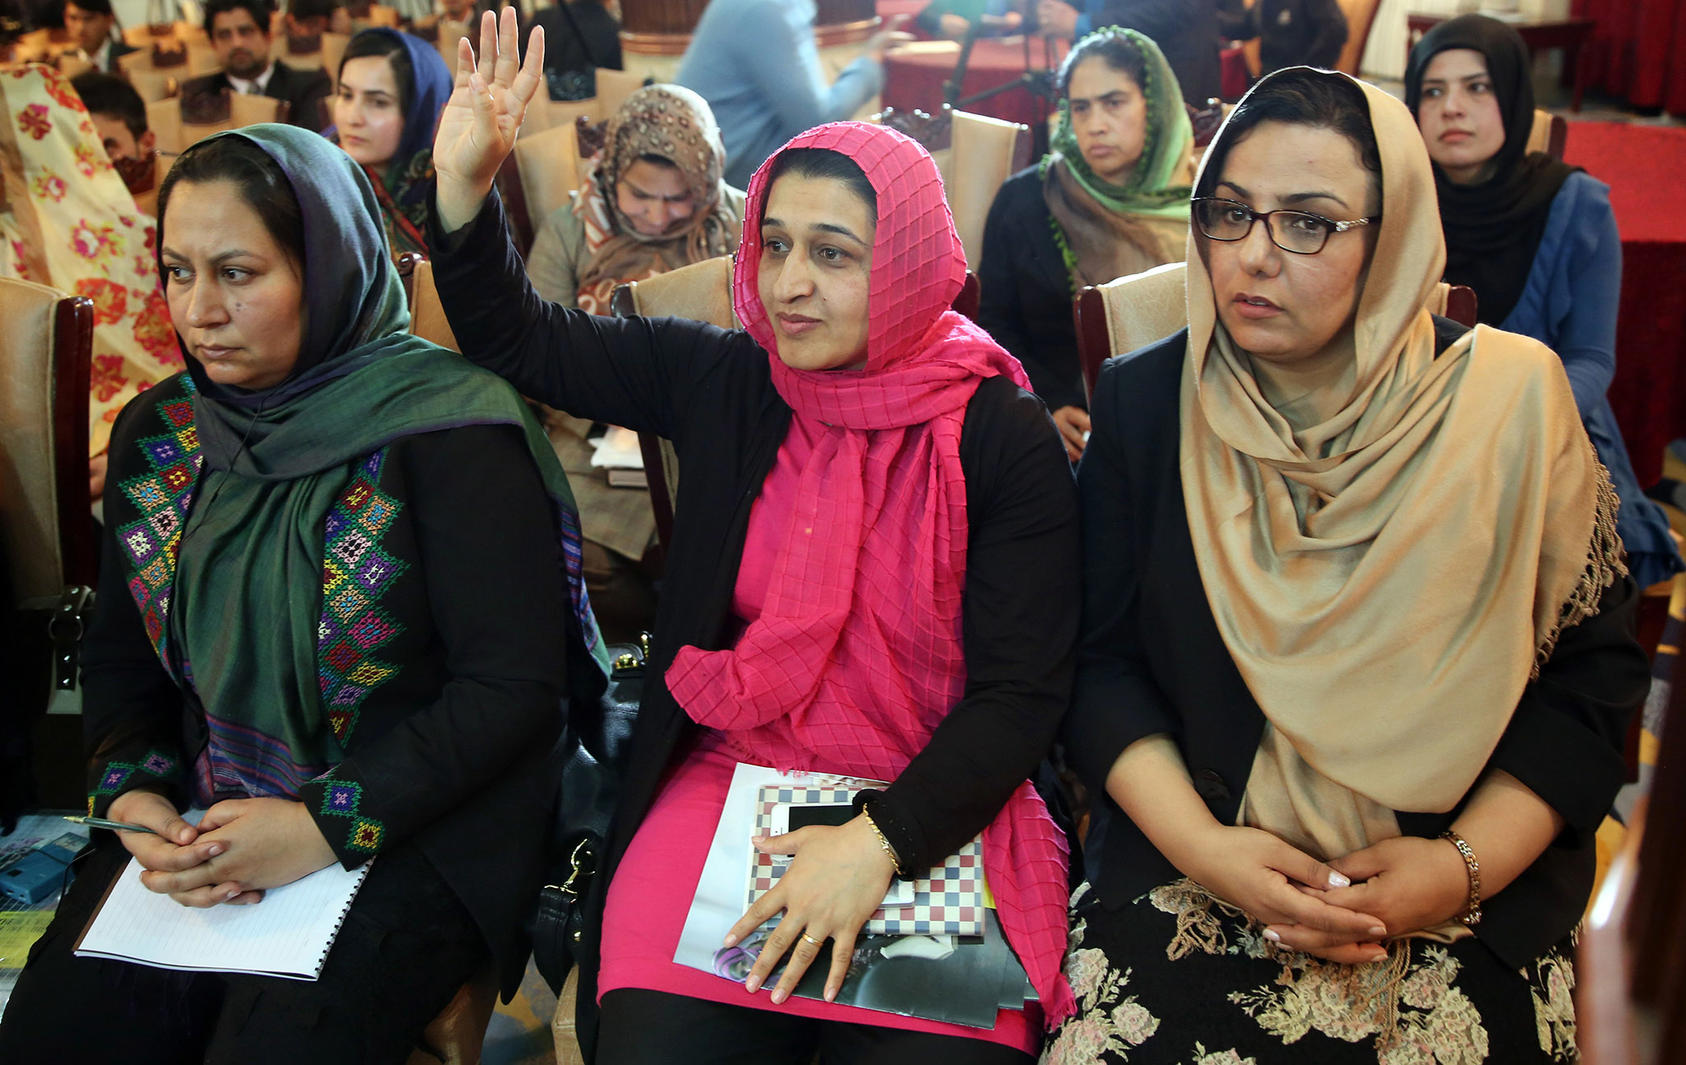 Representatives of the Taliban met with a delegation of female lawmakers and peace negotiators in June 2015, including Hasina Safi (center), executive director of the Afghan Women’s Network. (Massoud Hossaini/AP)